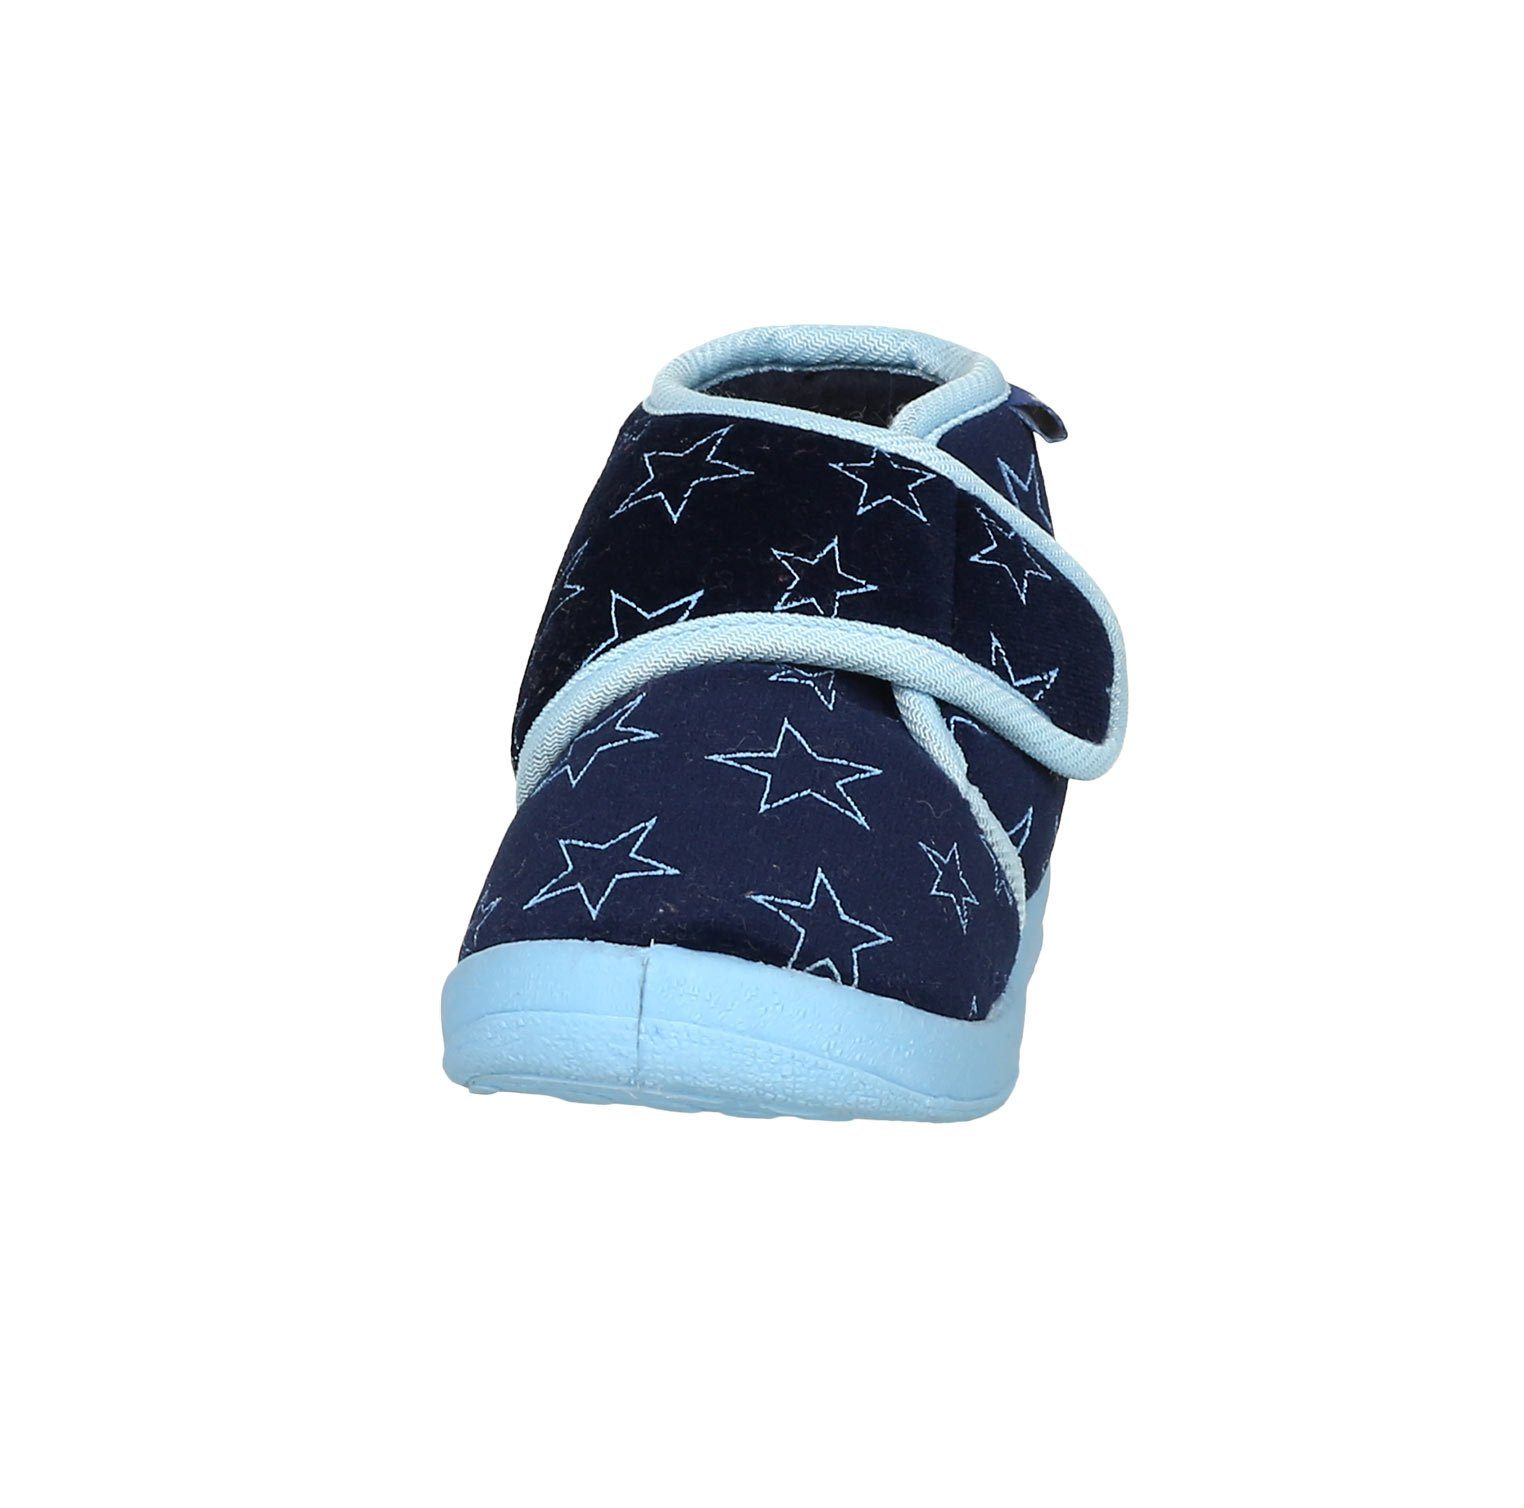 Hausschuh Pastell Hausschuh Marine Playshoes